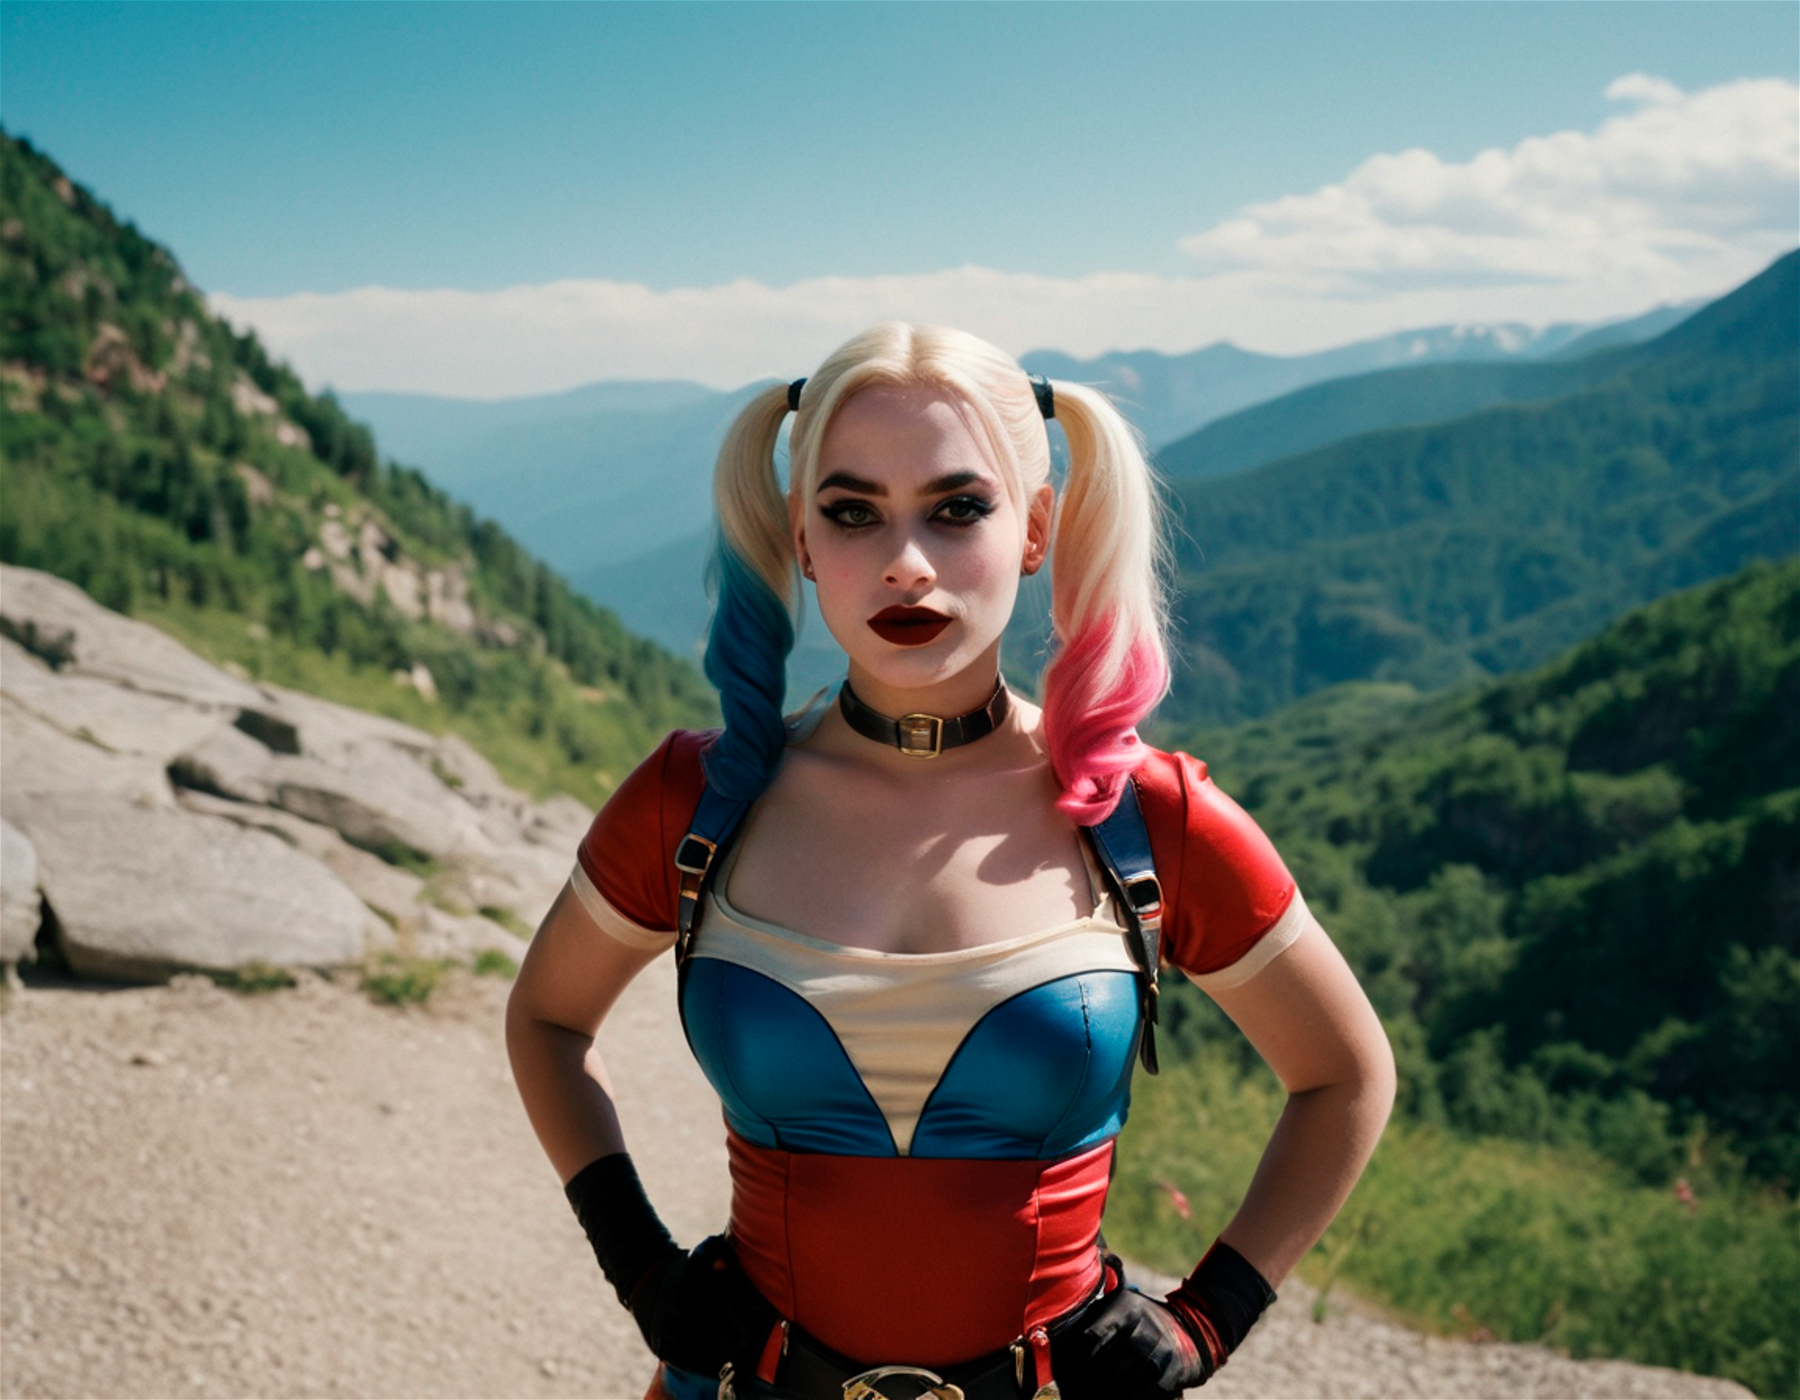 Harley Quinn, summer trip in the moutains